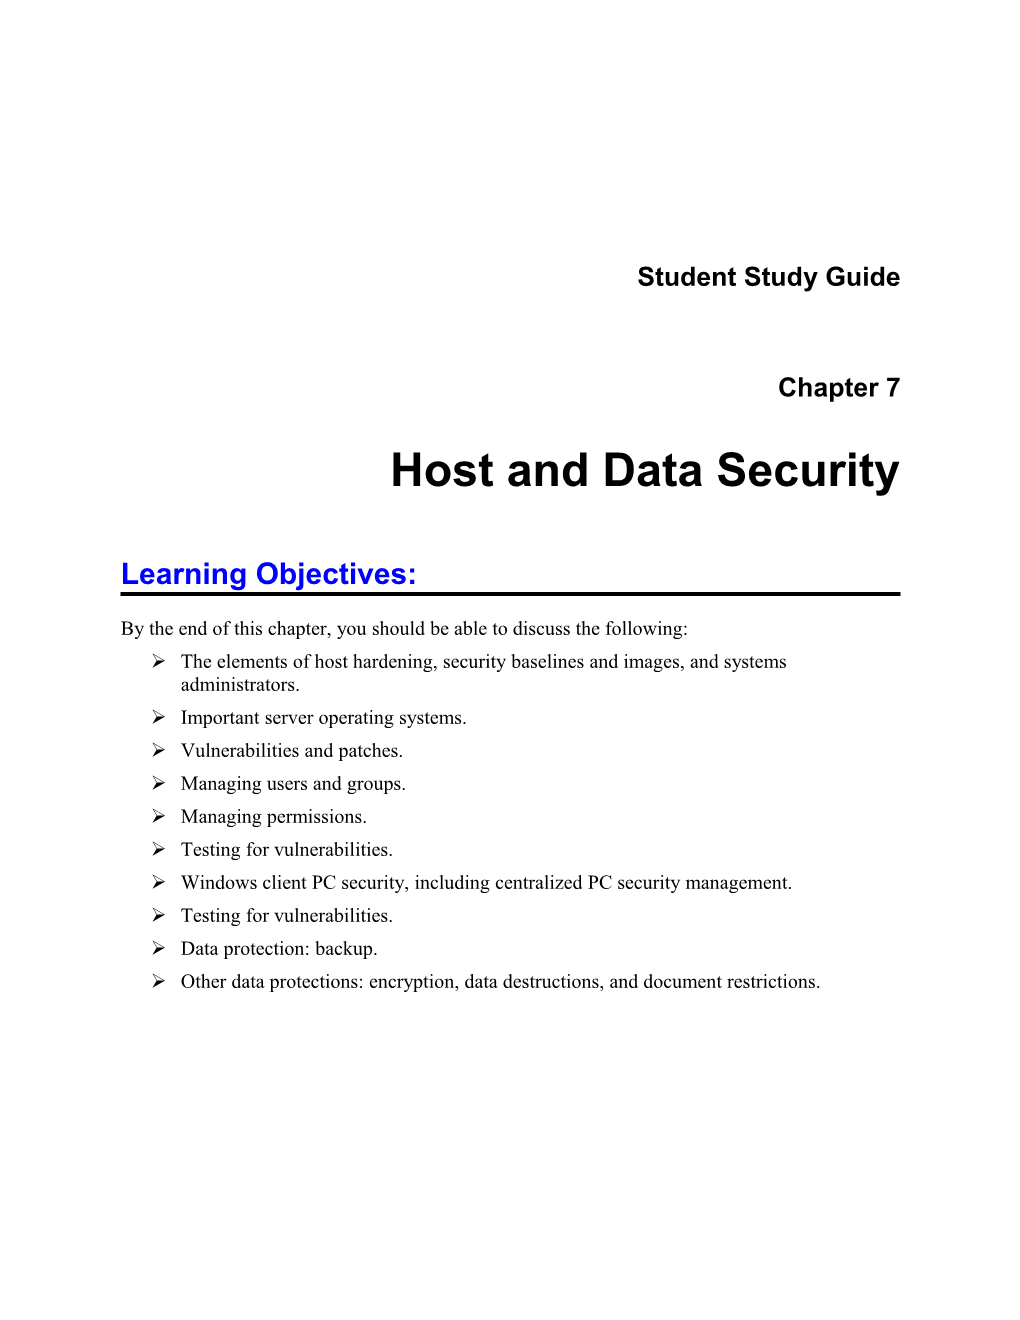 Chapter 7: Host and Data Security